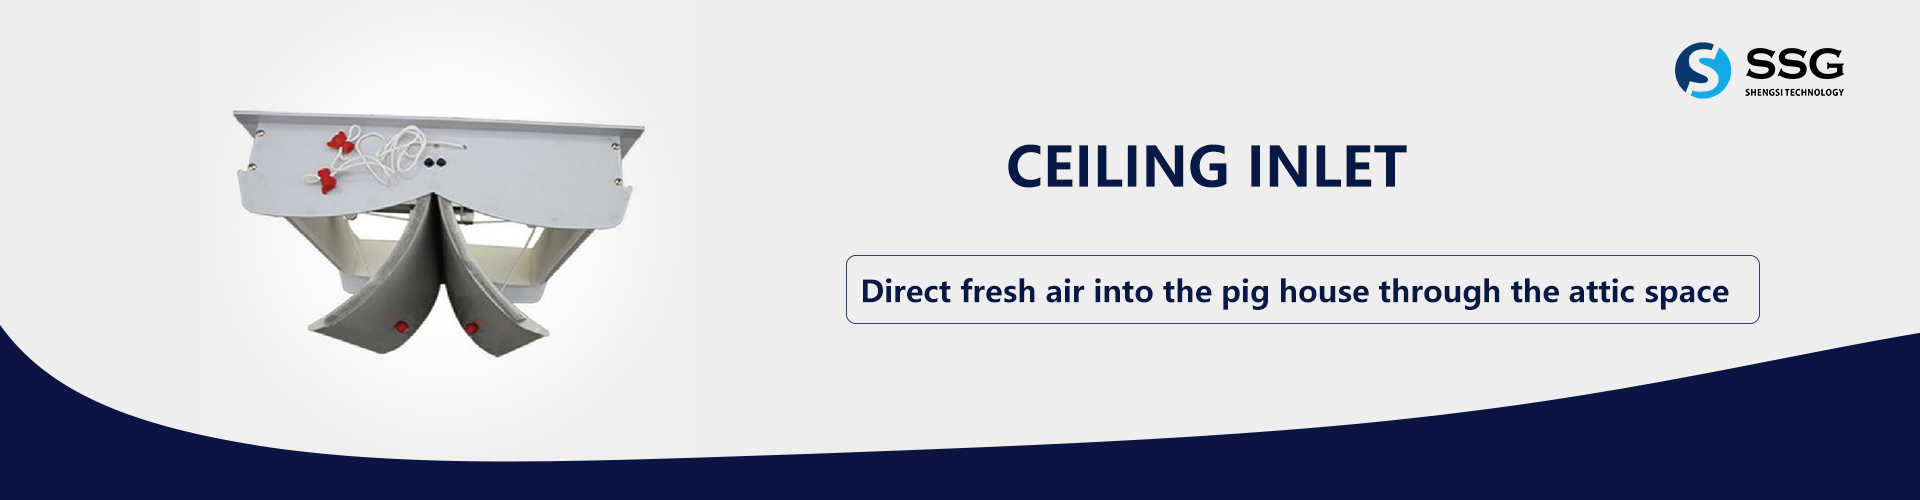 Ceiling-inlets-banner